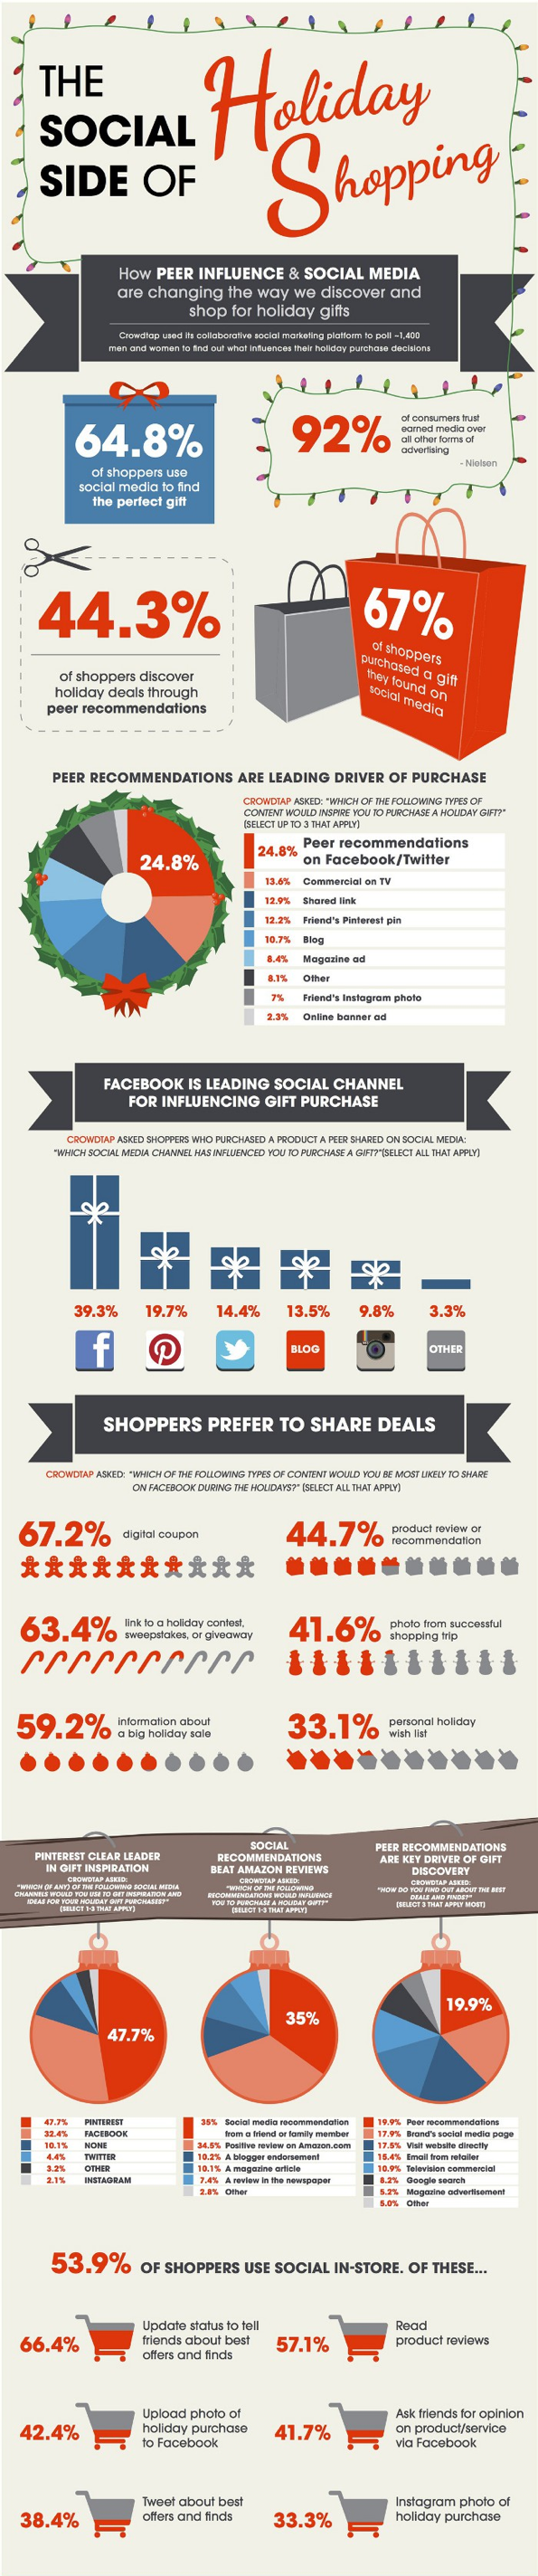 social-side-holiday-shopping-infographic